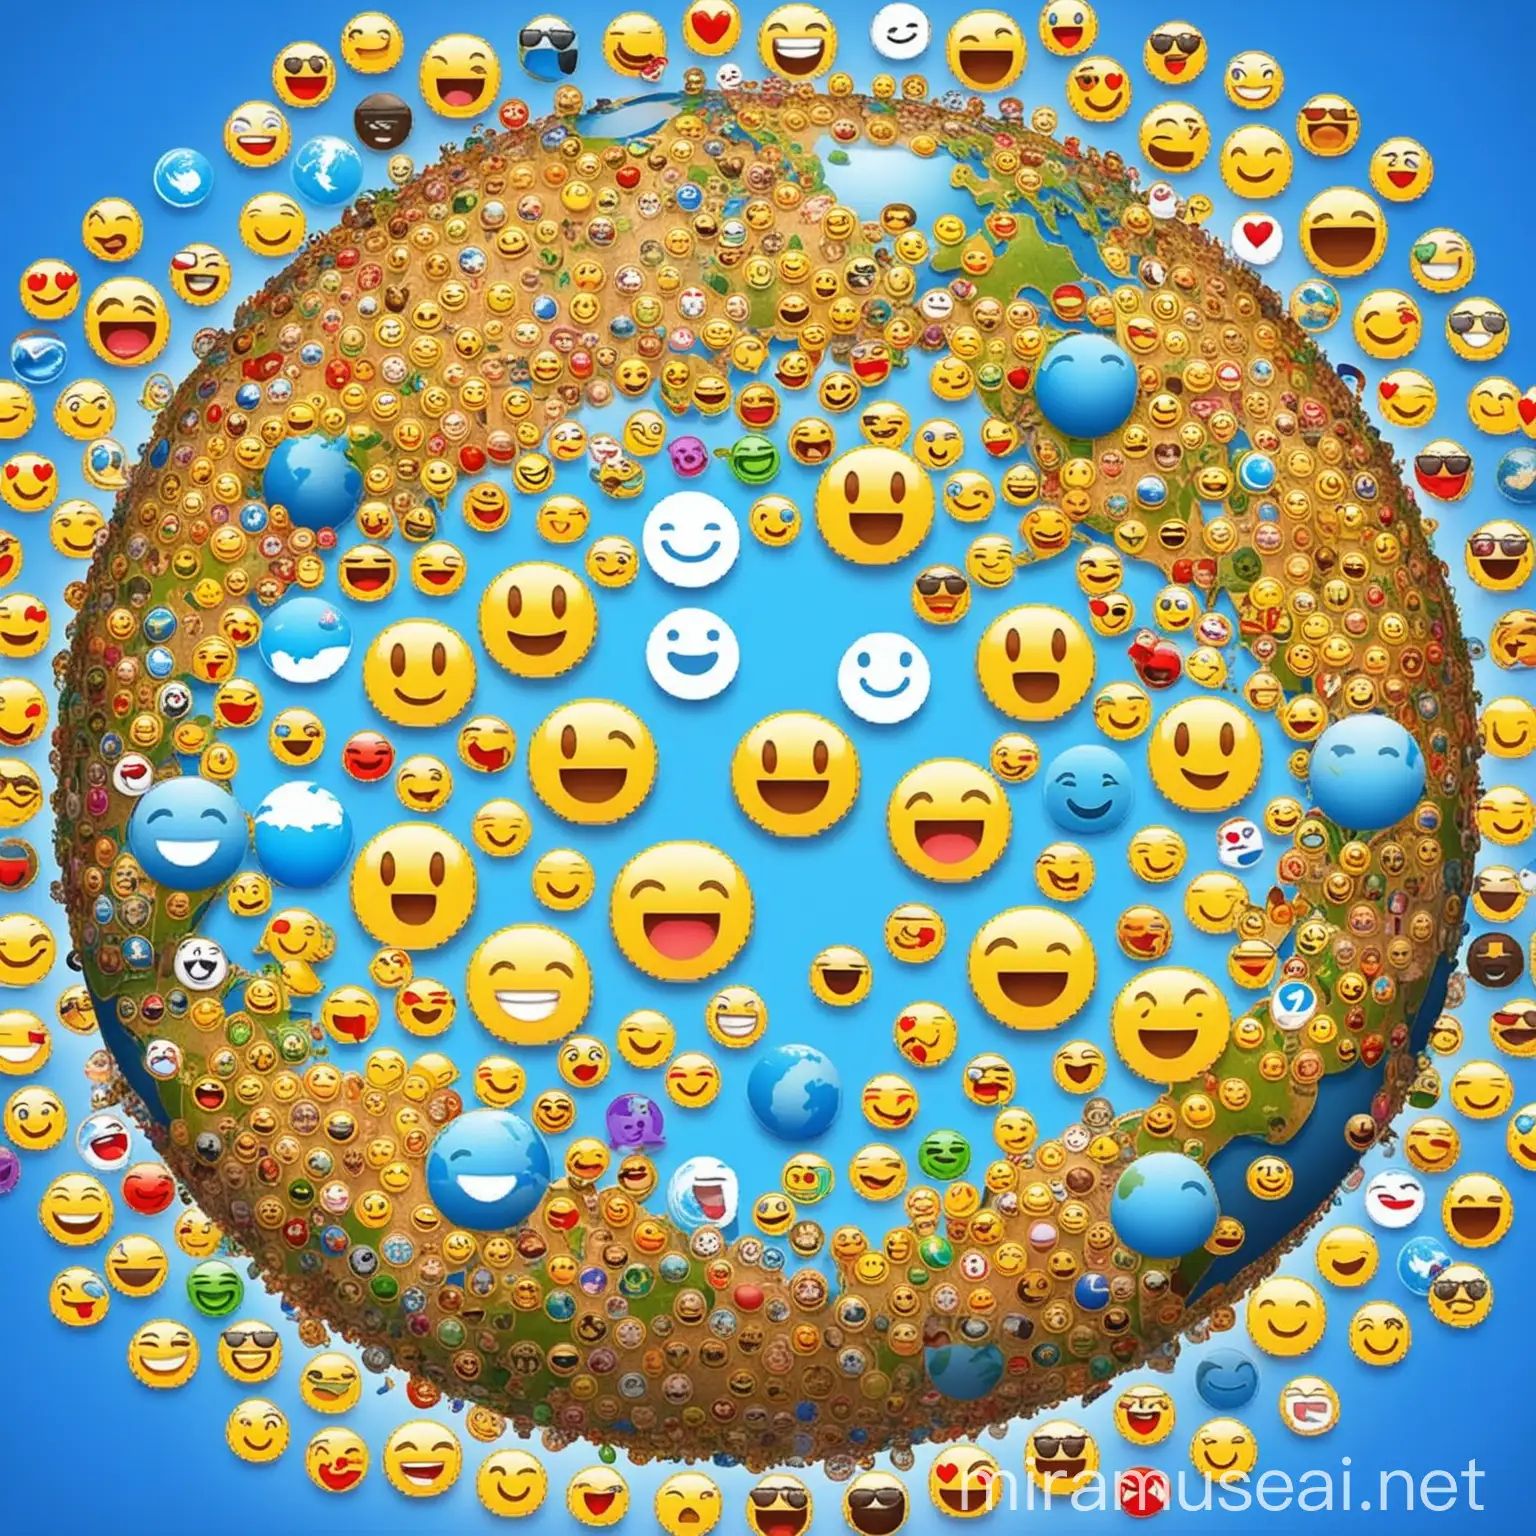 Global Smiling Face Surrounded by Smiling Emojis